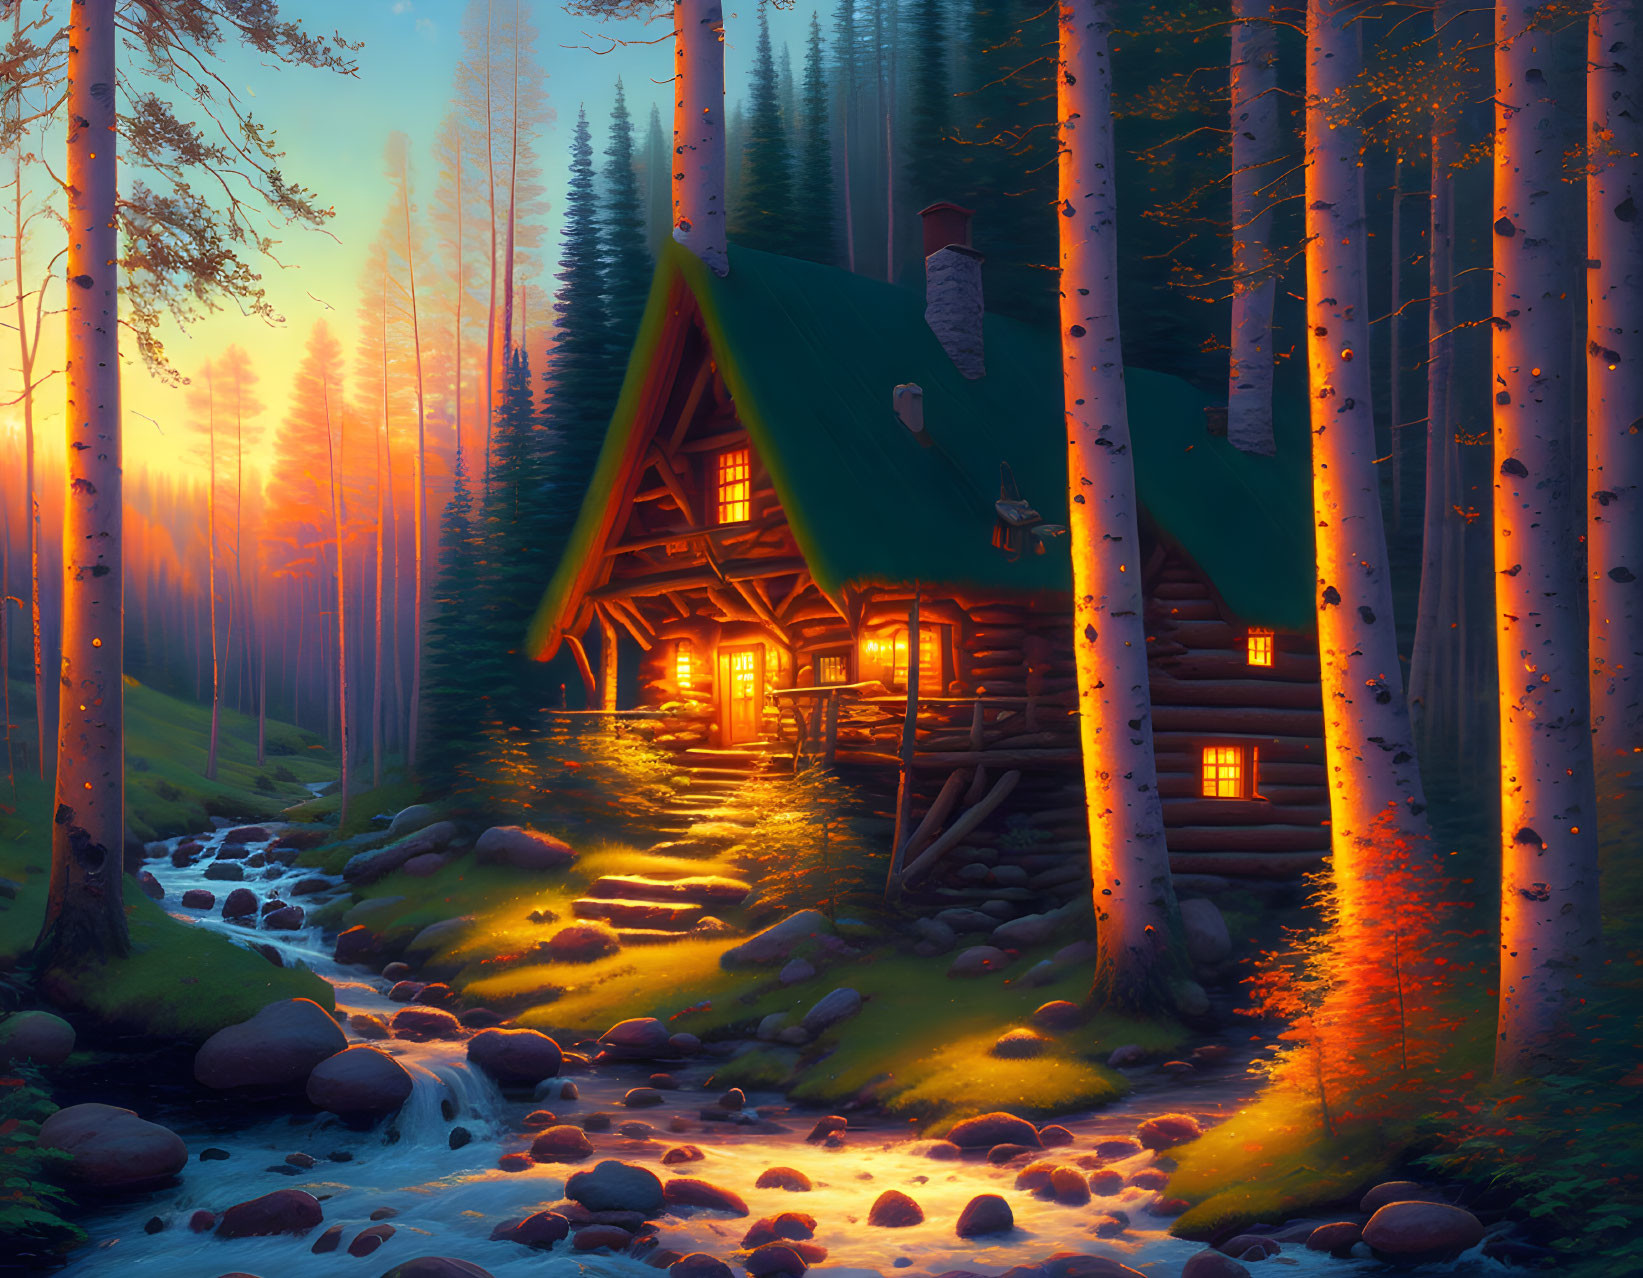 Rustic log cabin in forest by stream at sunset